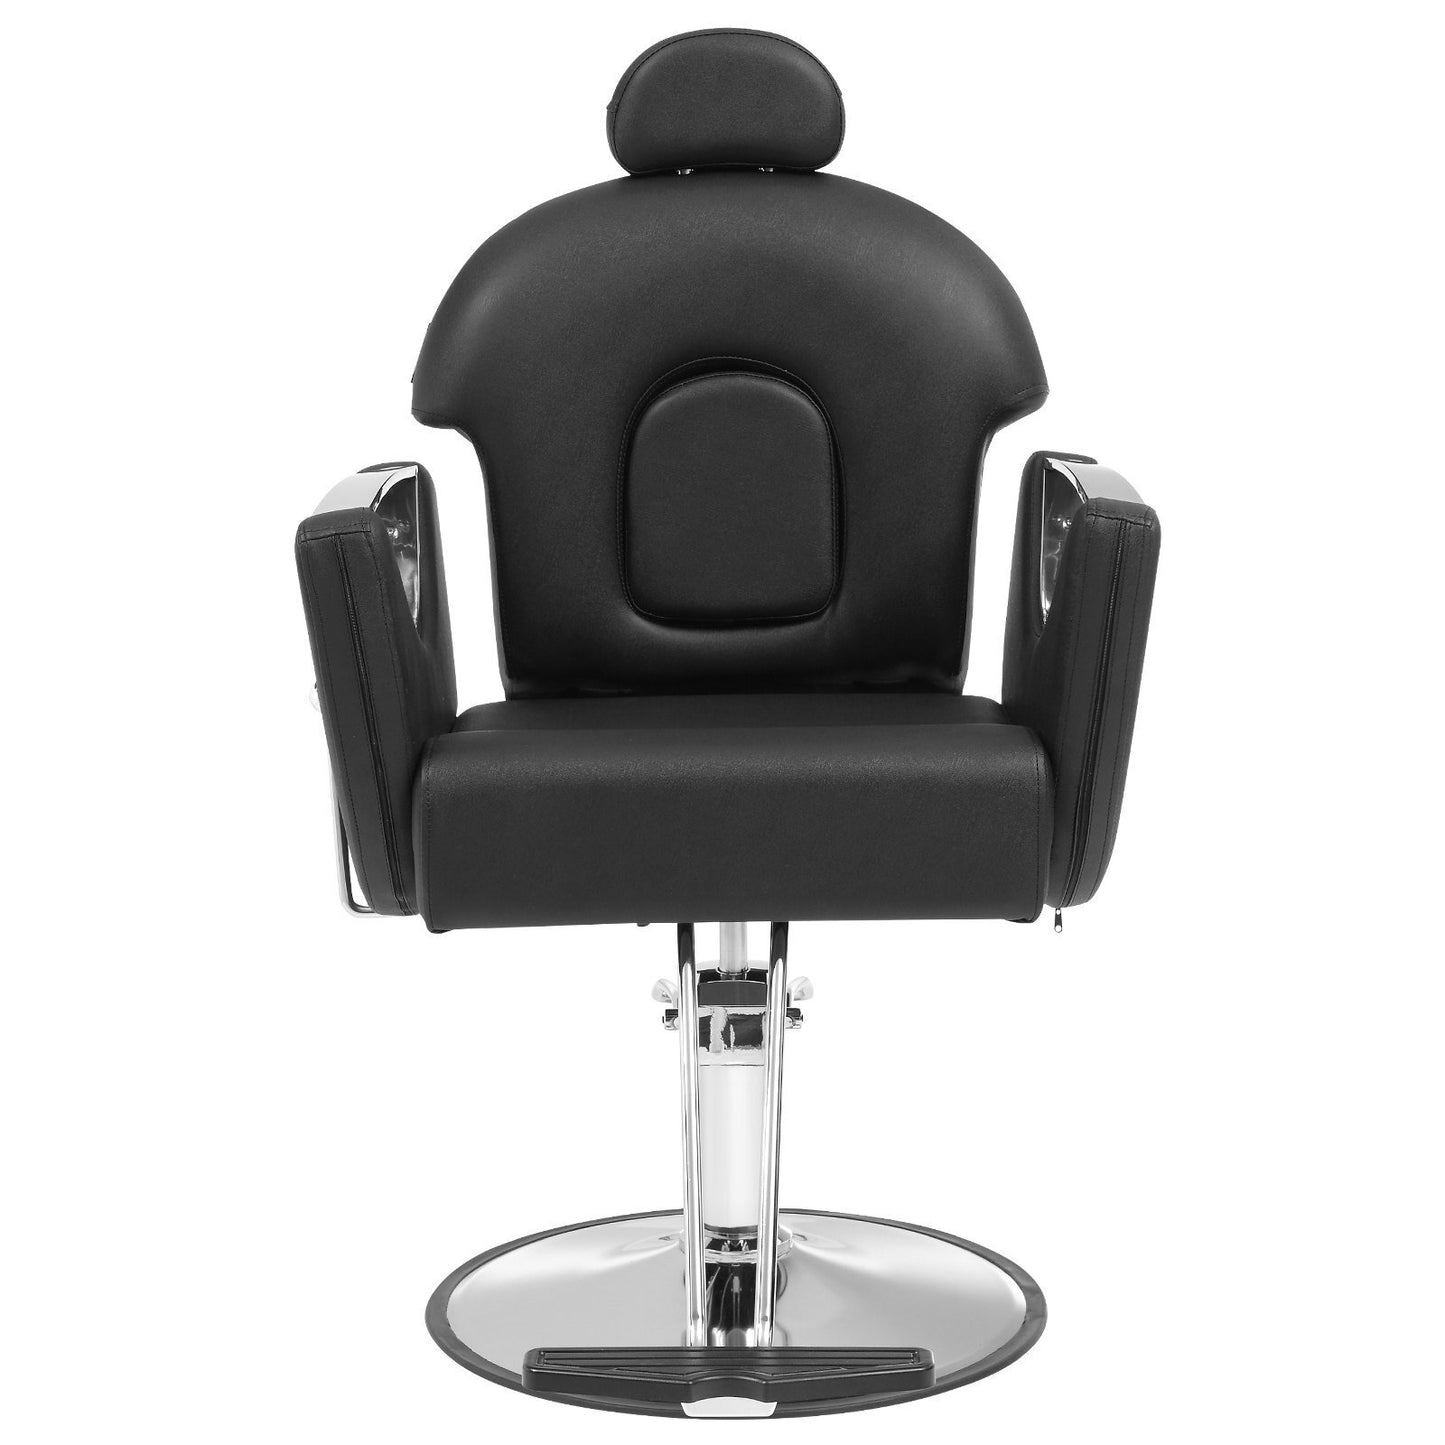 VEVOR Salon Chair, Hydraulic Recliner Barber Chair for Hair Stylist, 360 Degrees Swivel 90-130 Reclining Salon Chair for Beauty Spa Shampoo, Max Load Weight 330 lbs, Black